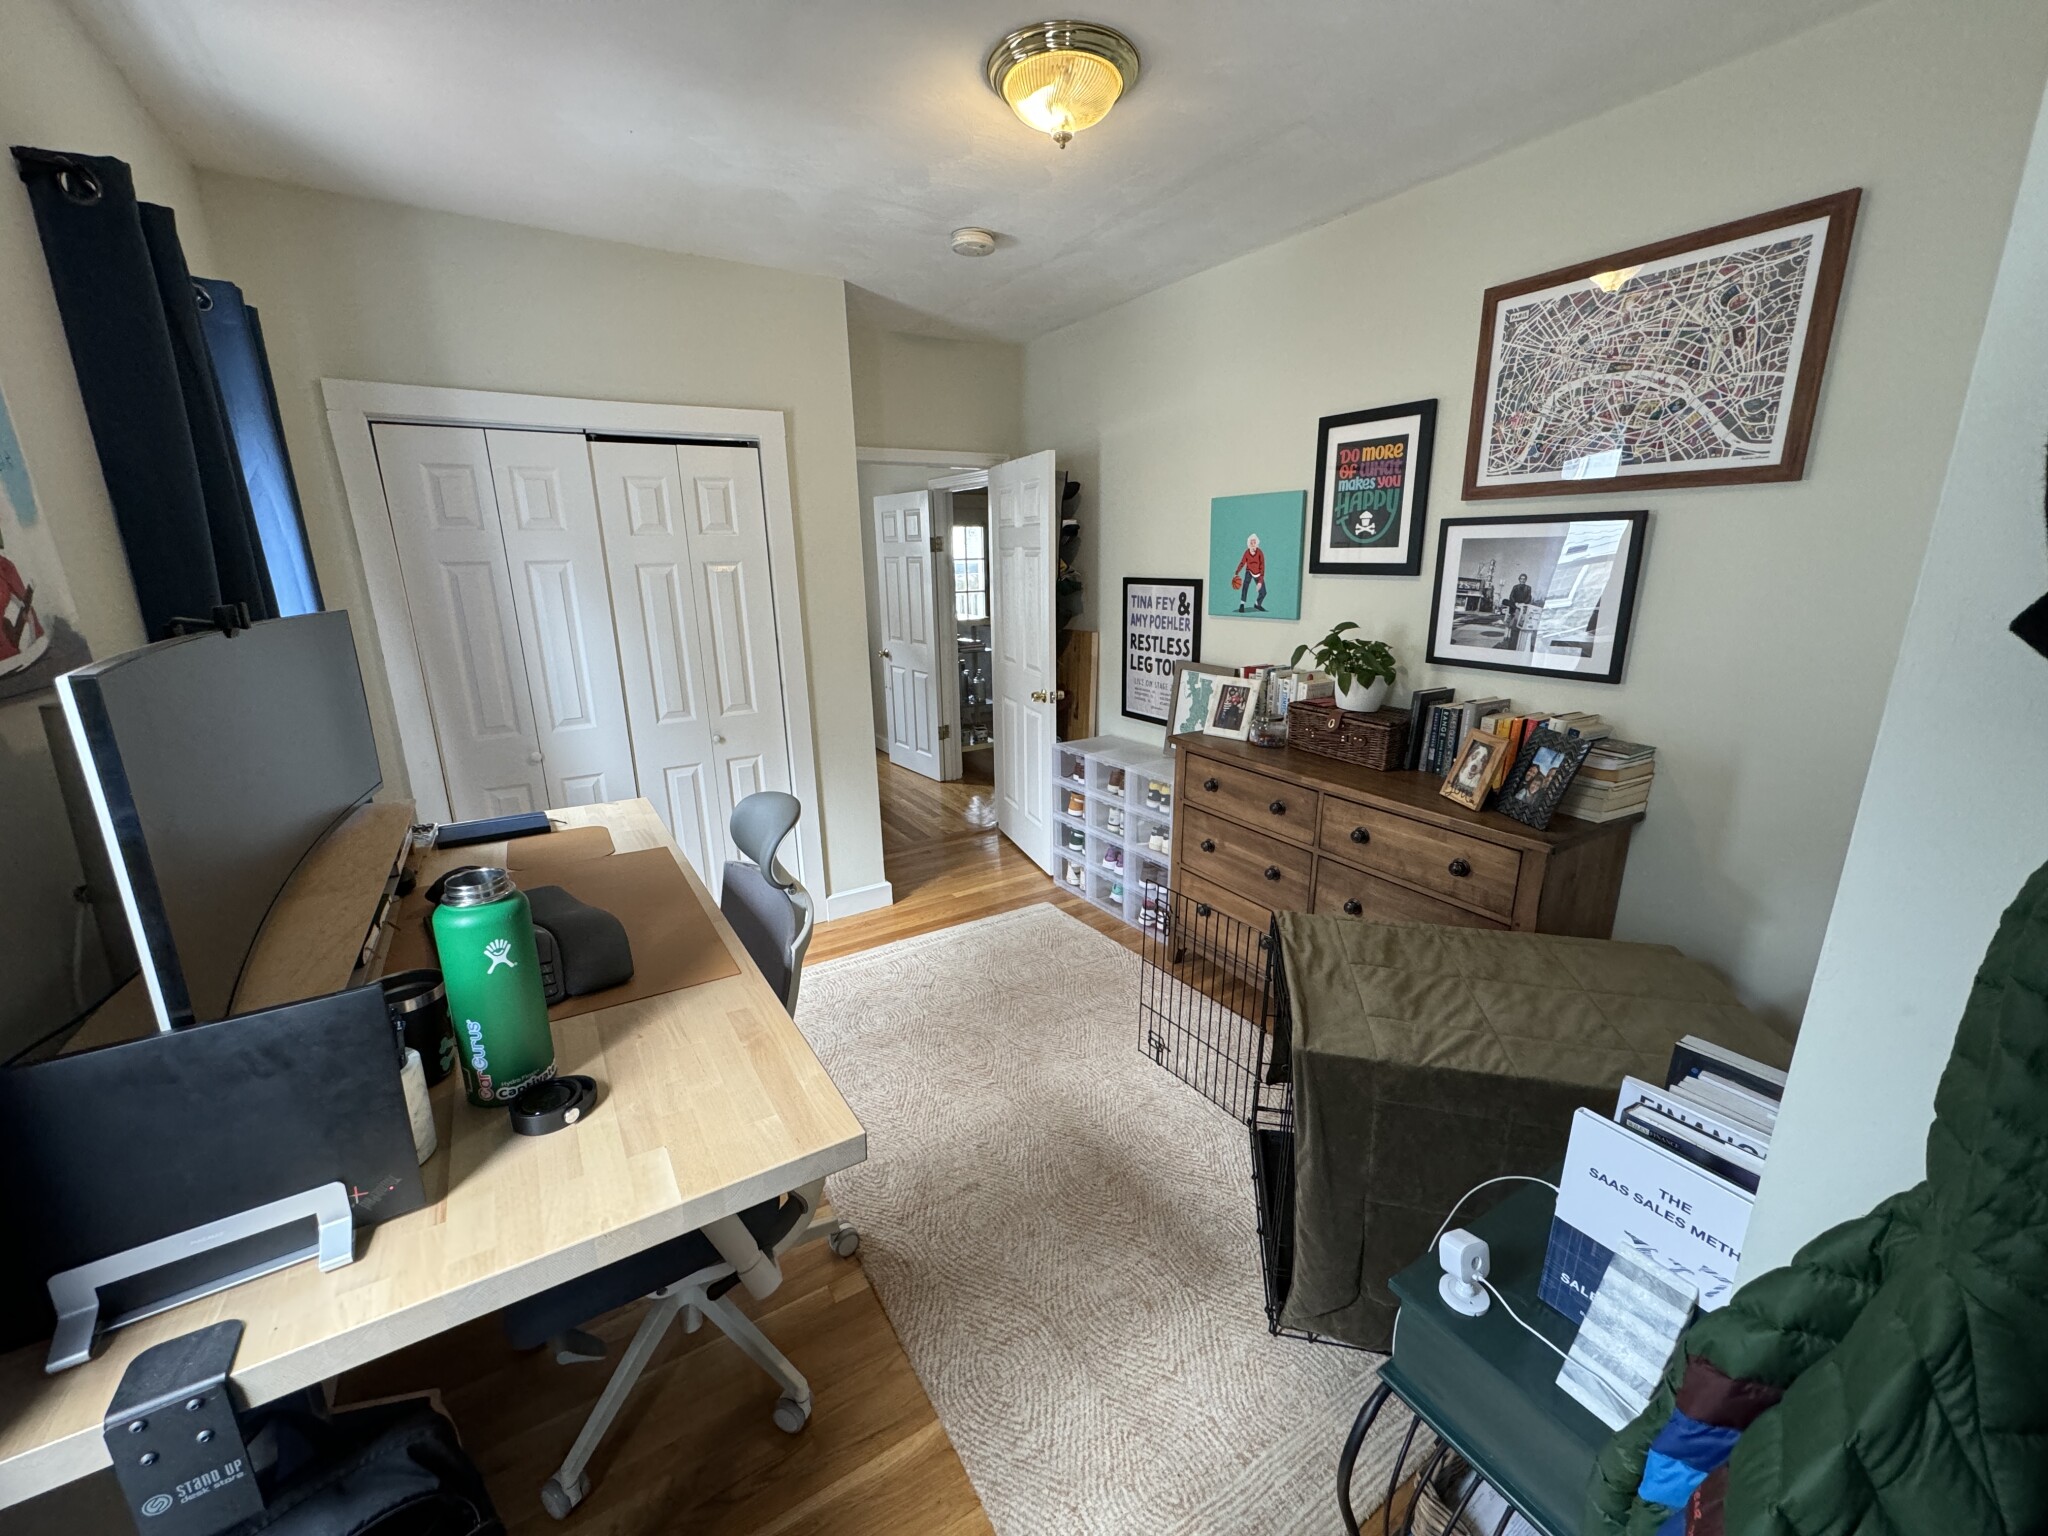 Photos of apartment on Governor Winthrop,Somerville MA 02145